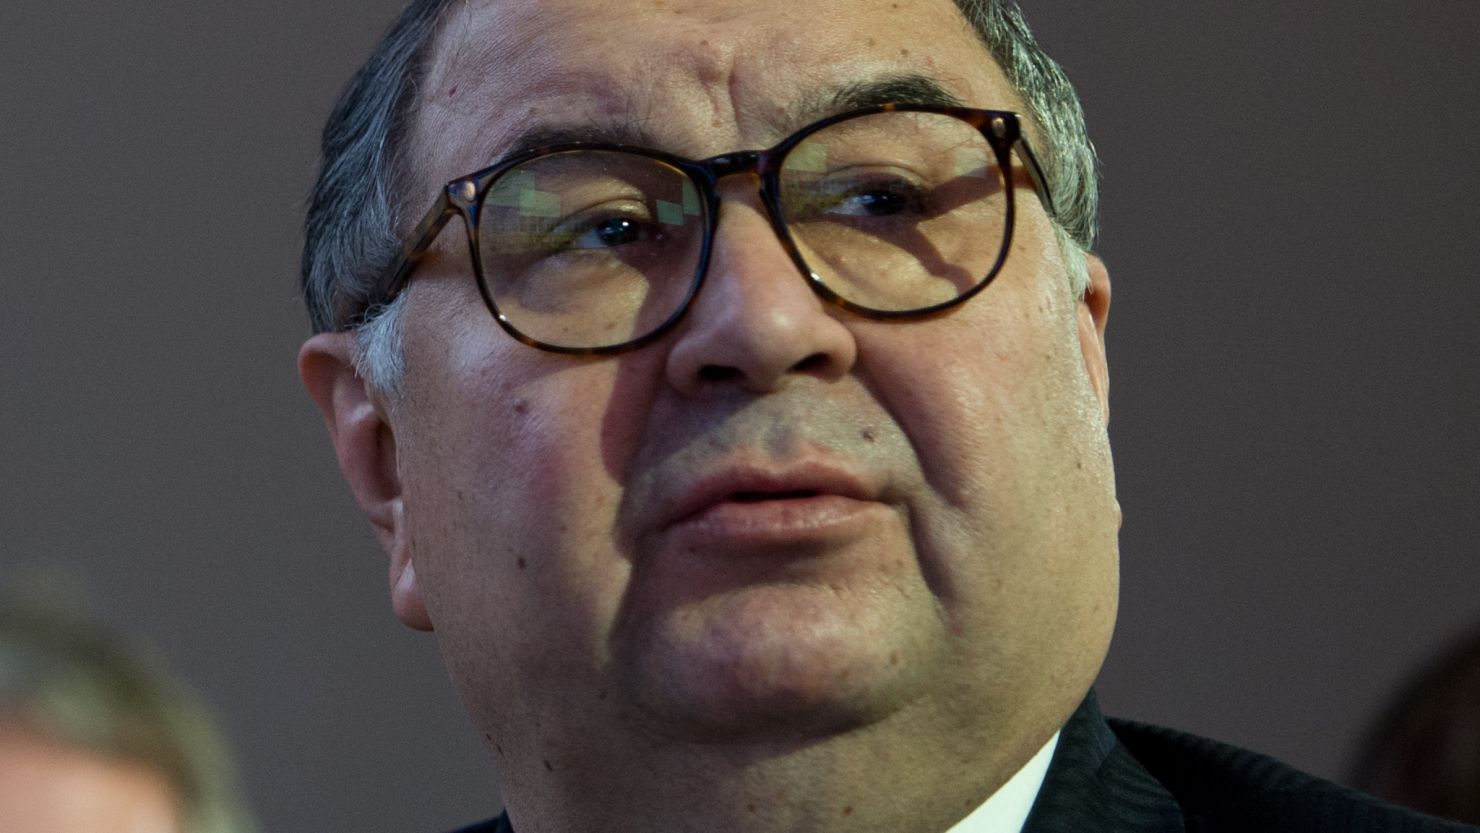 Uzbekistan-born Russian billionaire Alisher Usmanov has been named the richest man in Britain by the Sunday Times.